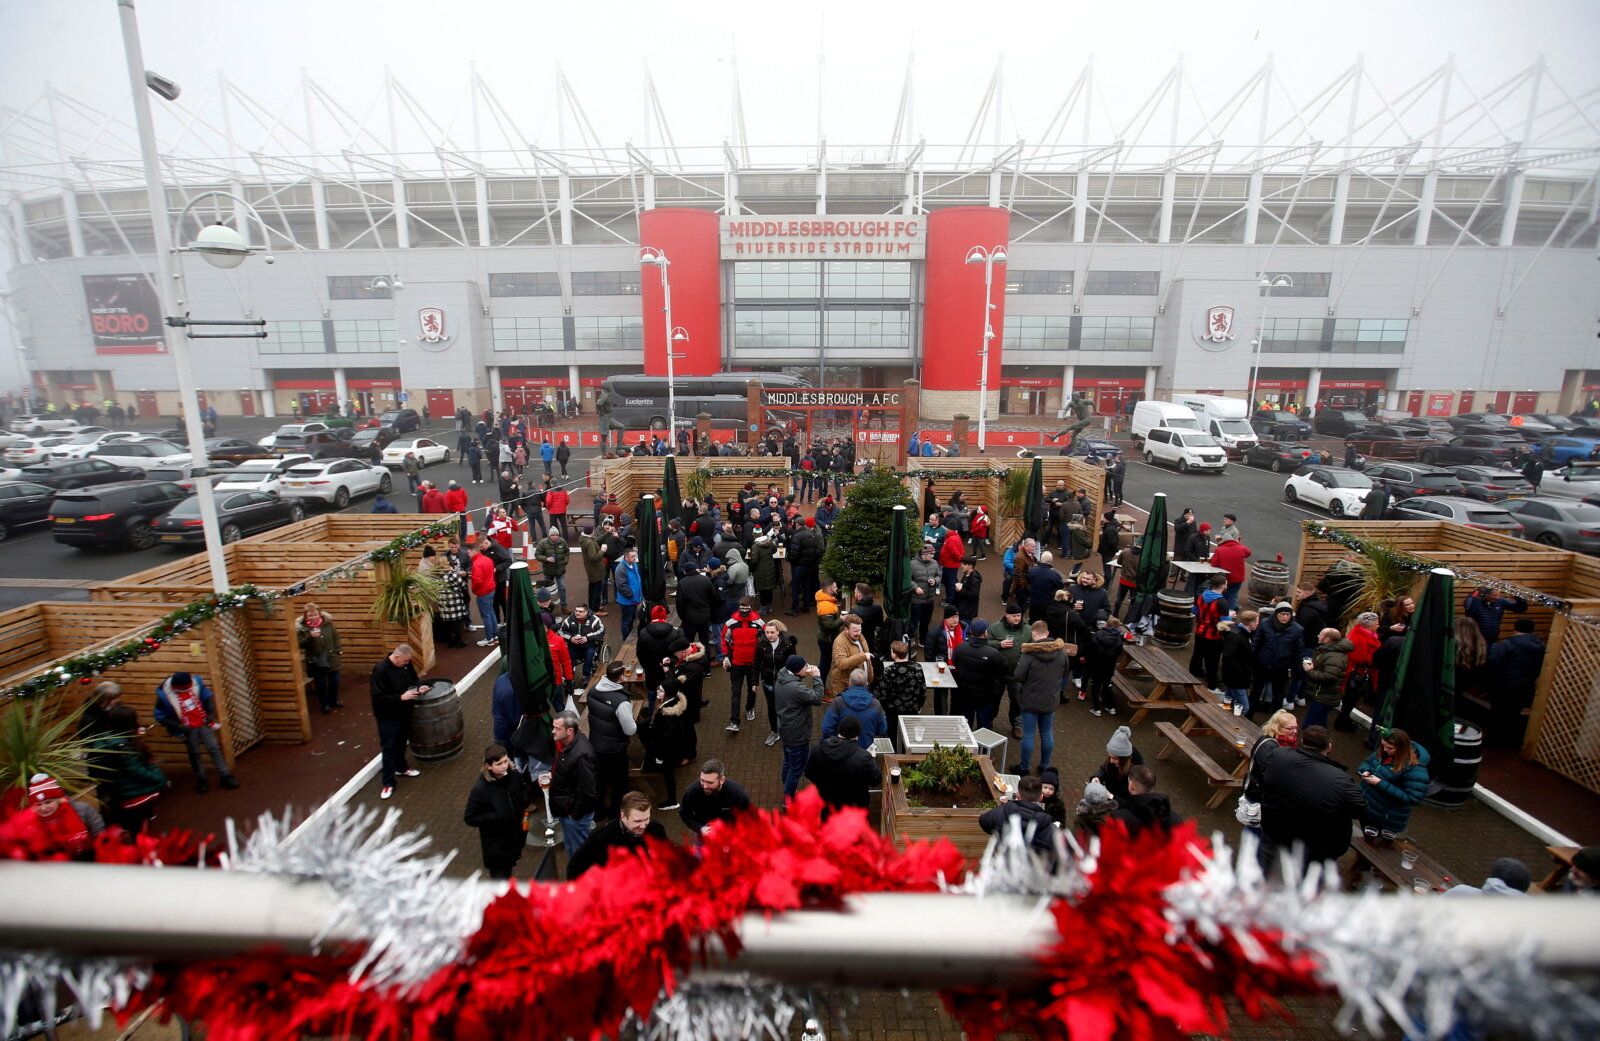 Soccer Football - Championship - Middlesbrough v AFC Bournemouth - Riverside Stadium, Middlesbrough, Britain - December 18, 2021  General view outside the stadium before the match   Action Images/Ed Sykes  EDITORIAL USE ONLY. No use with unauthorized audio, video, data, fixture lists, club/league logos or 